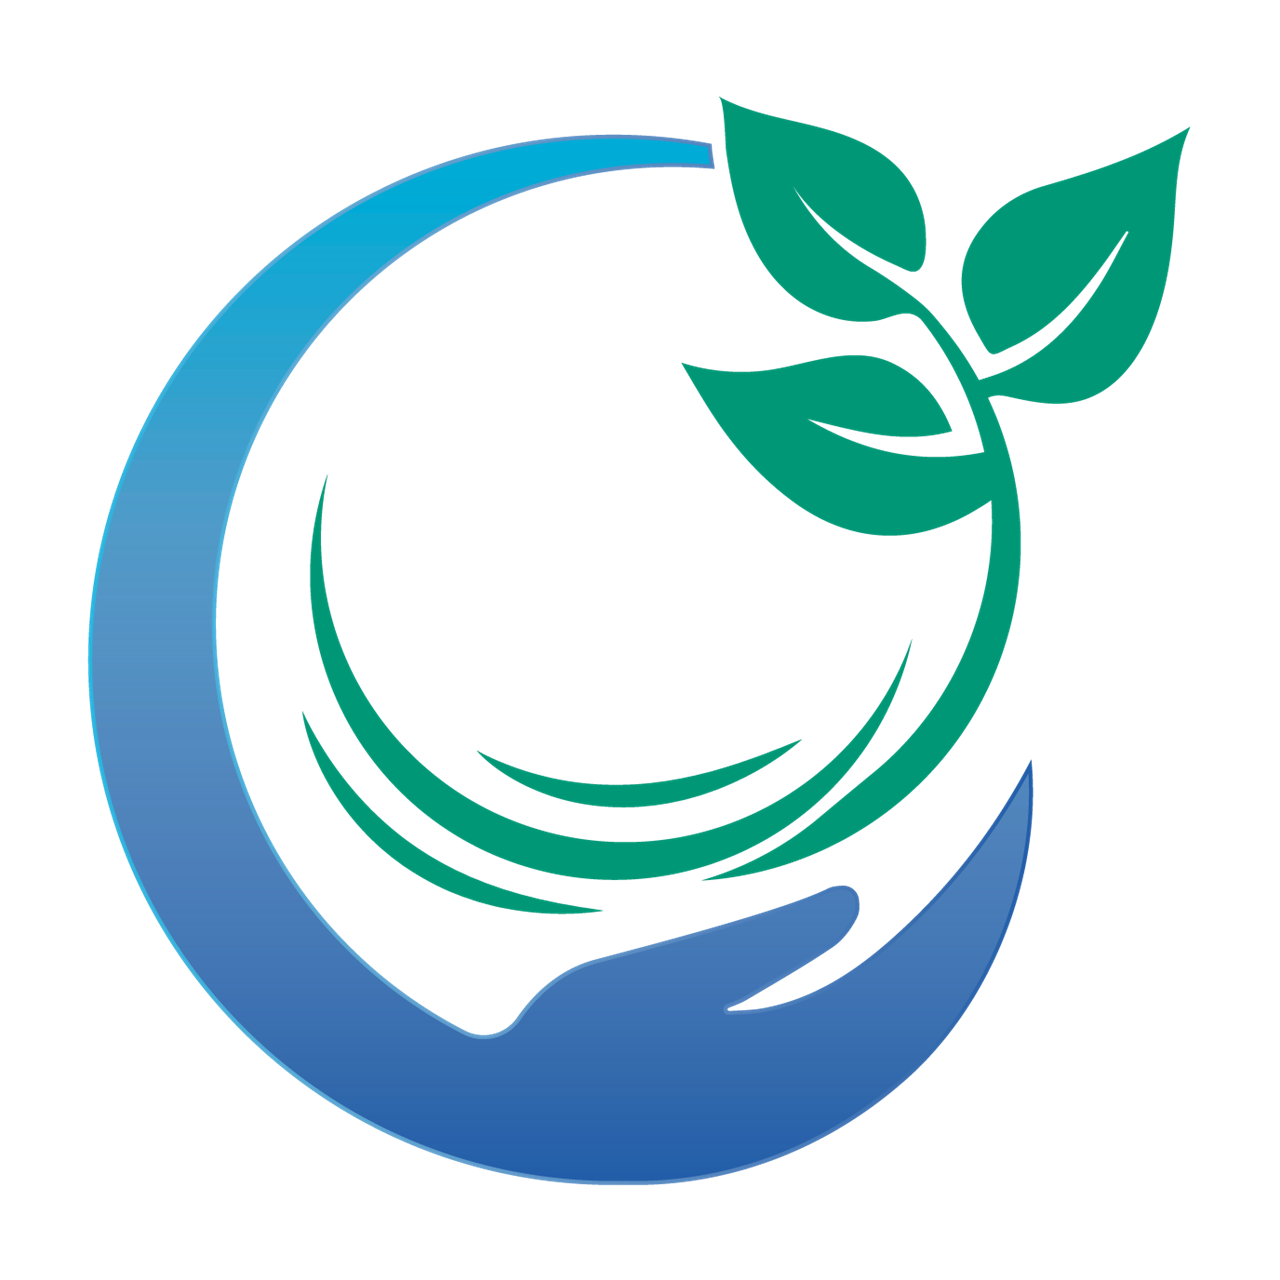 Nurturing the Seed Project logo